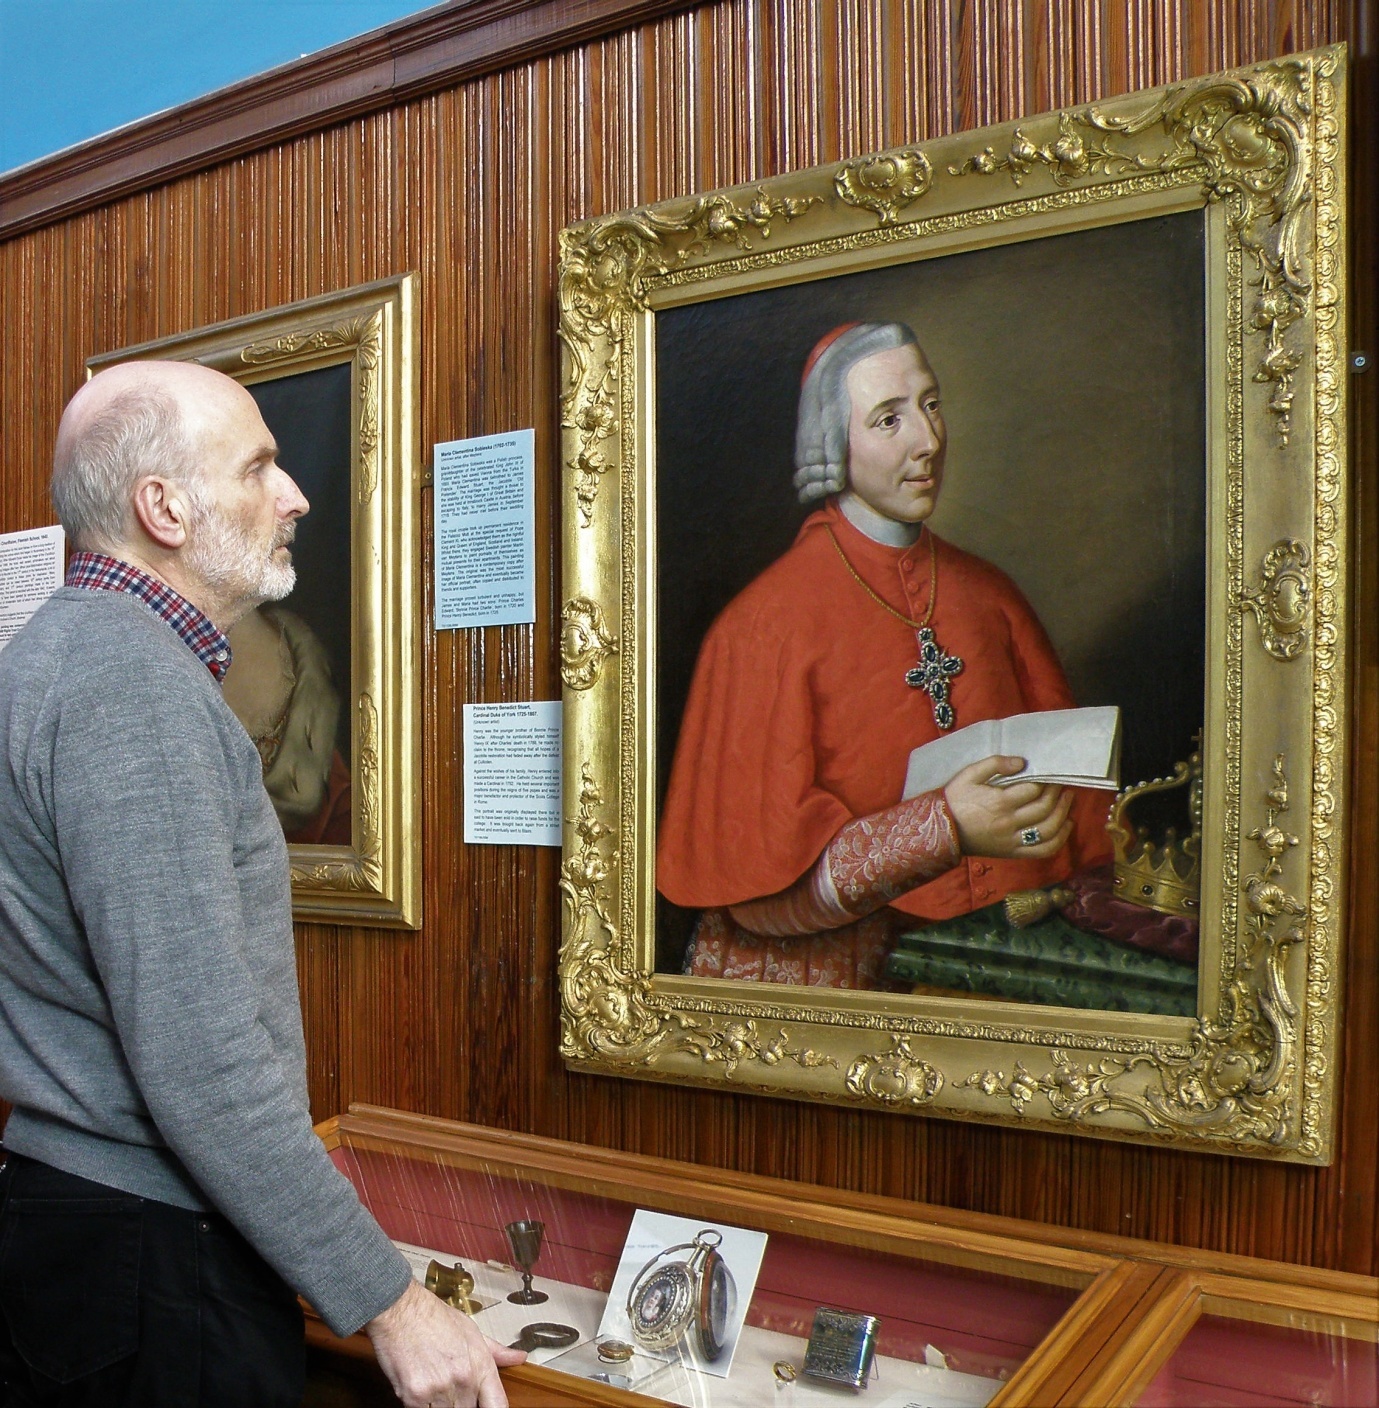 The portrait of Cardinal Henry Benedict Stuart is examined by Ian Forbes at Blairs Museum.